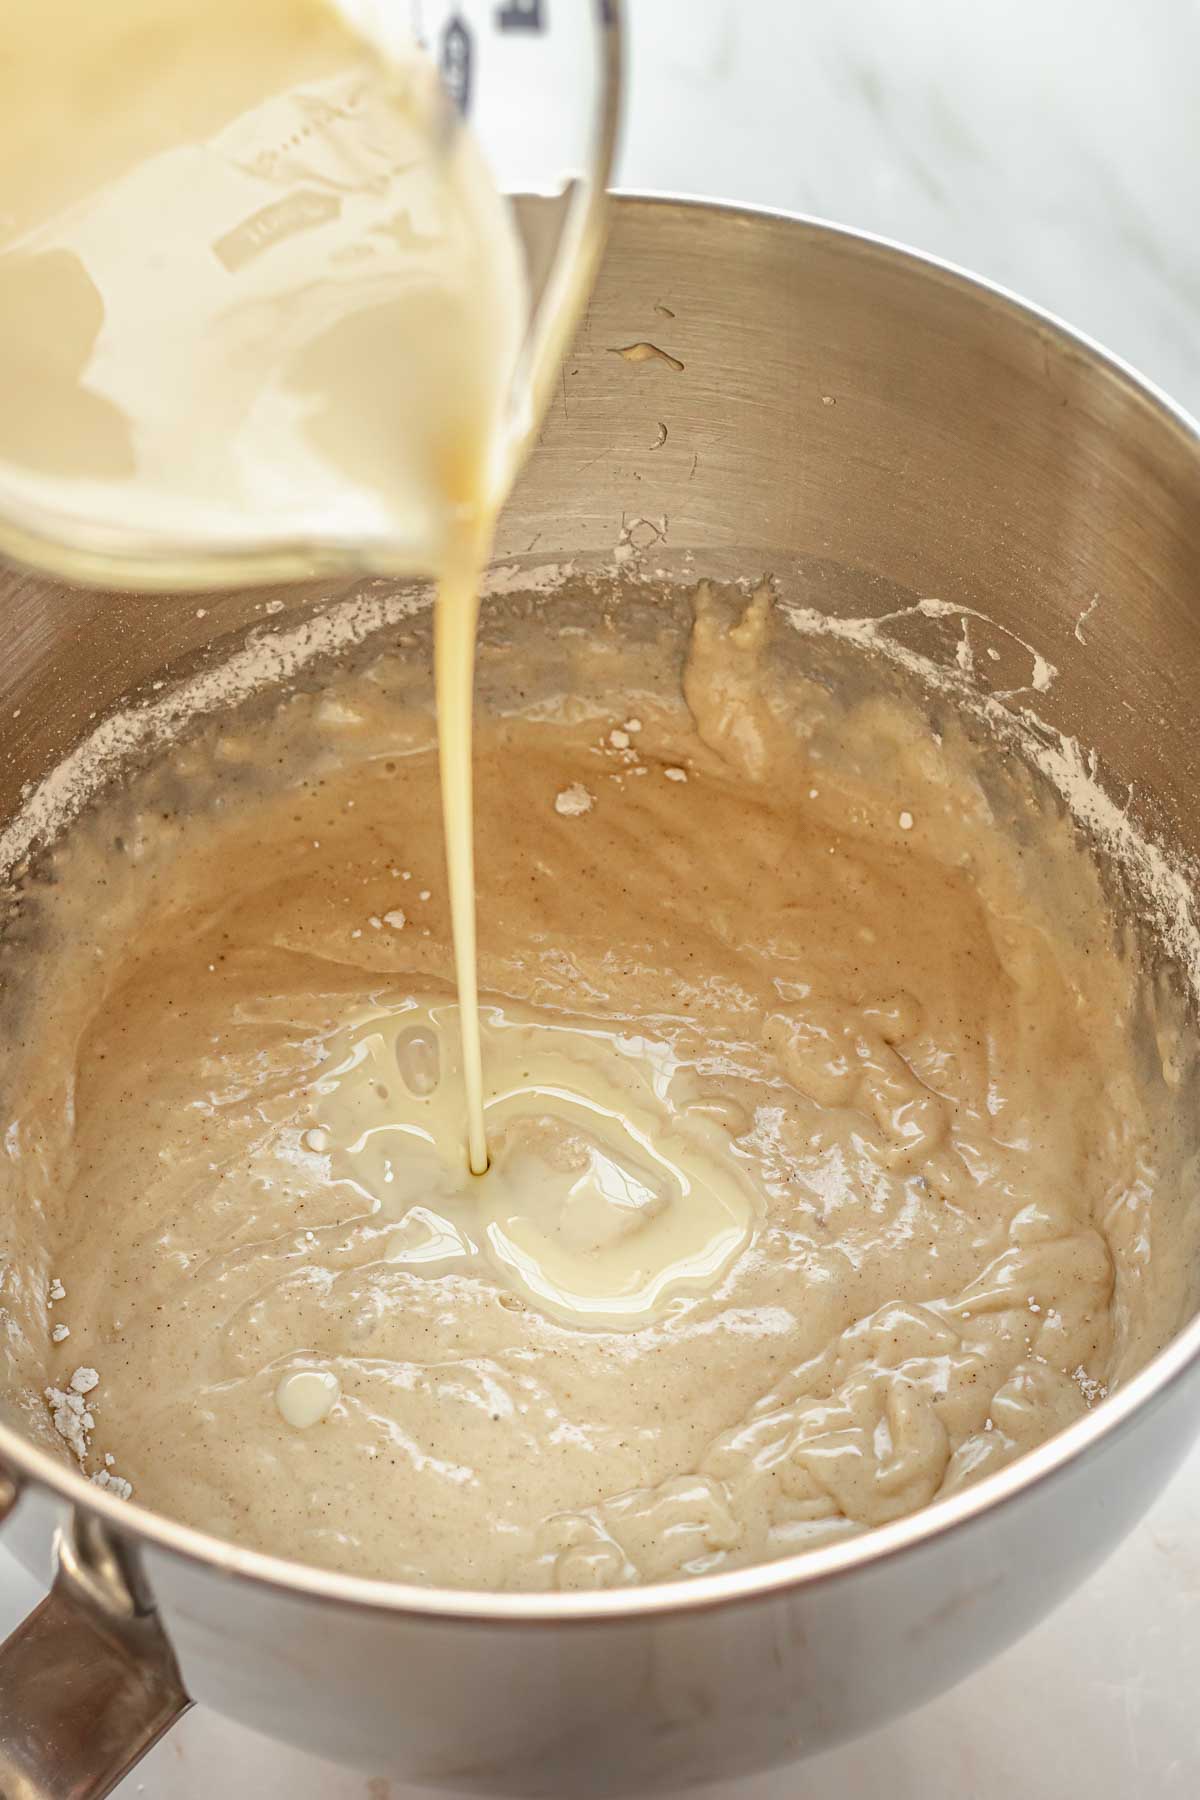 Eggnog being poured into the cake batter.